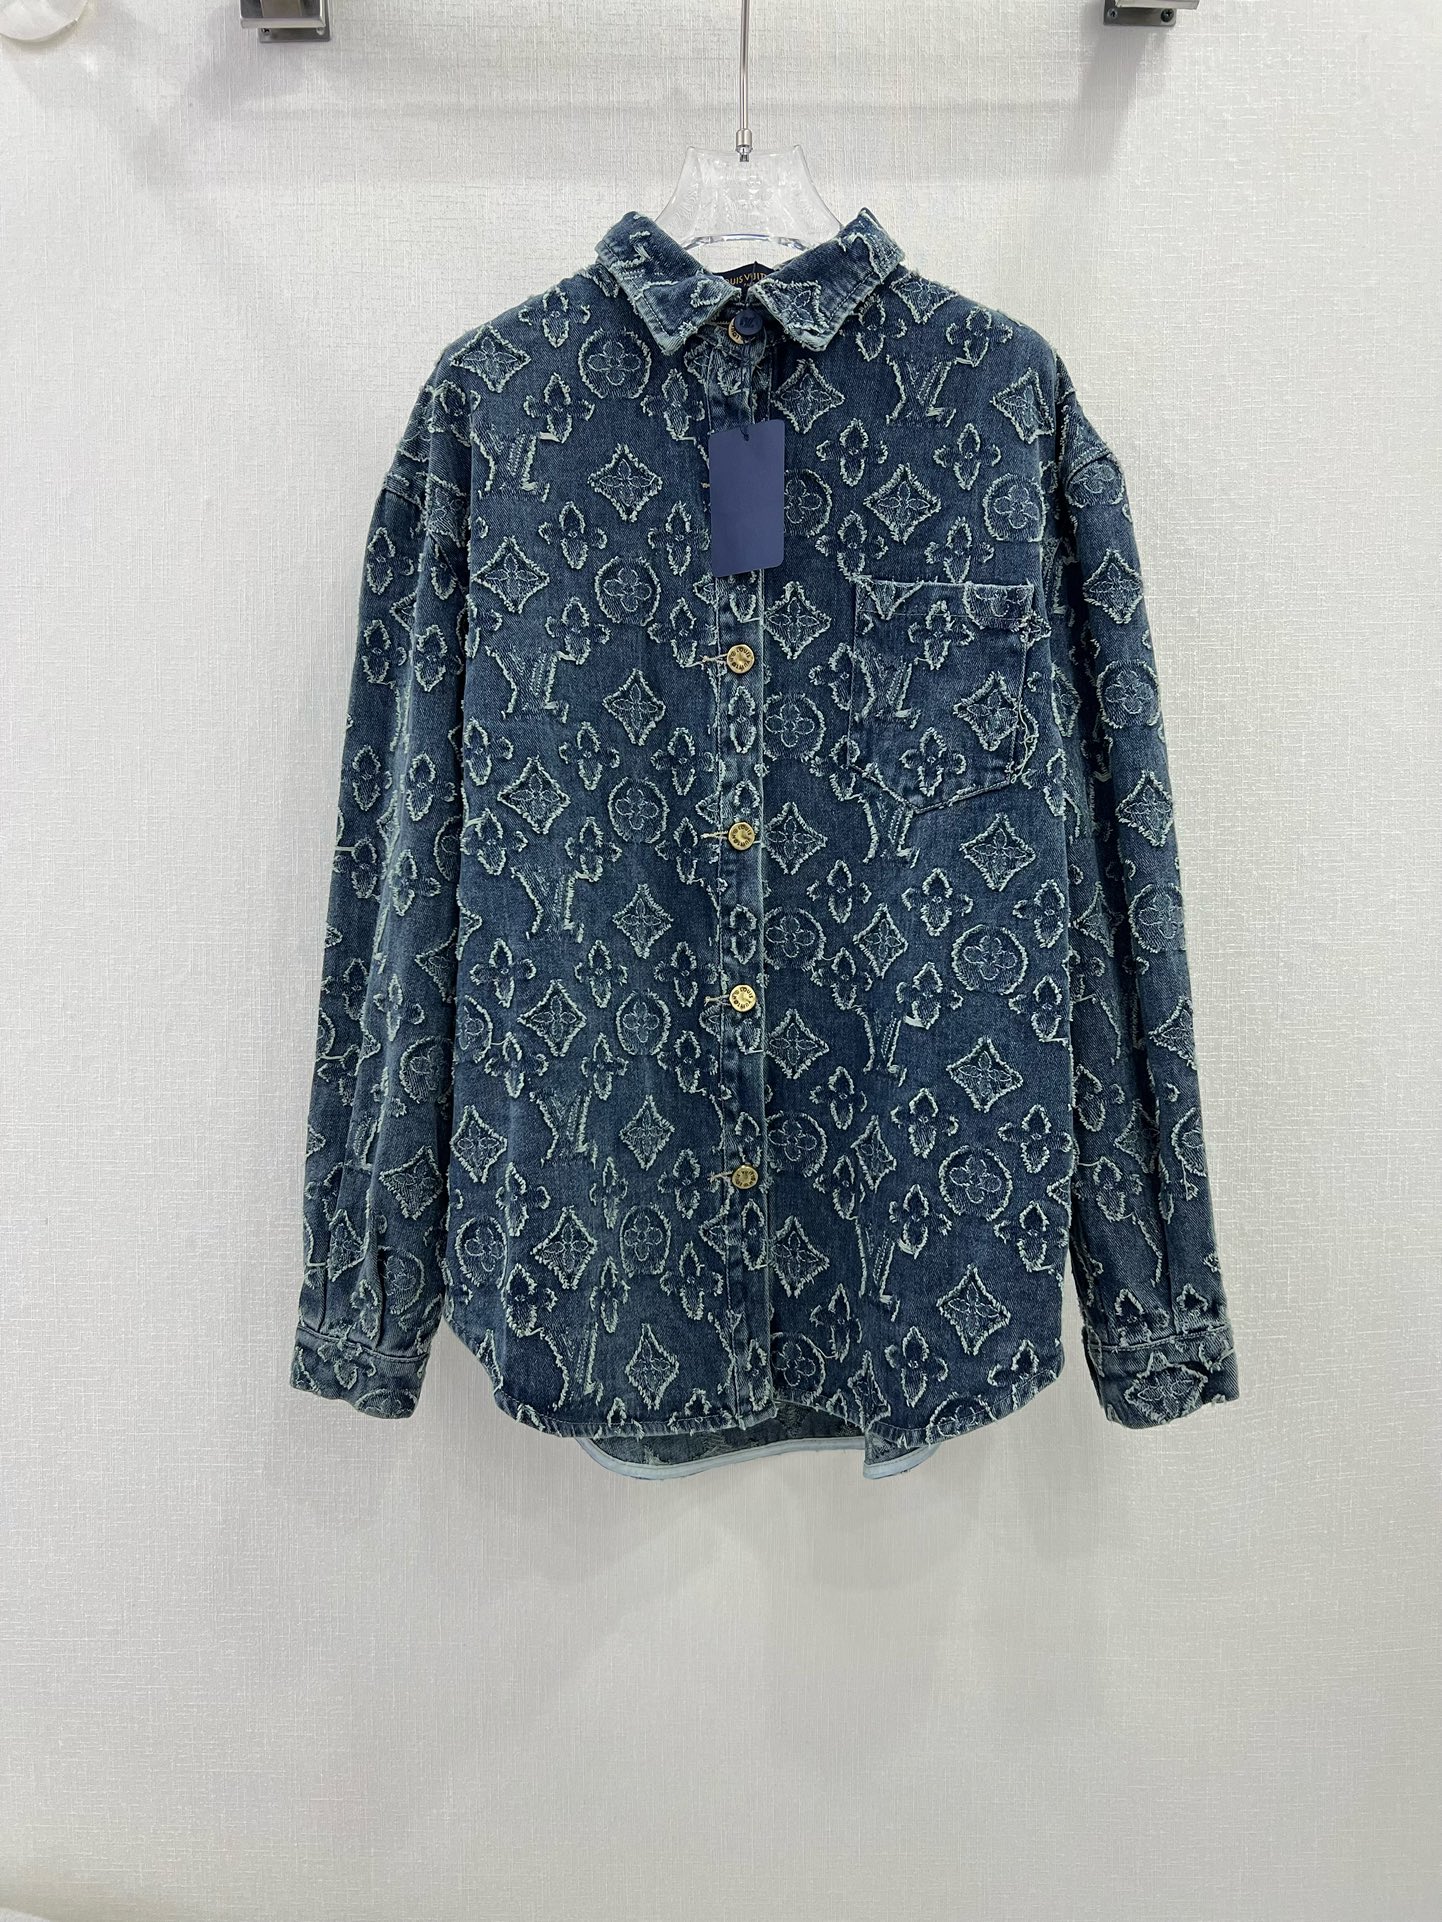 Louis Vuitton AAAAA
 Clothing Coats & Jackets Shirts & Blouses Spring Collection Vintage